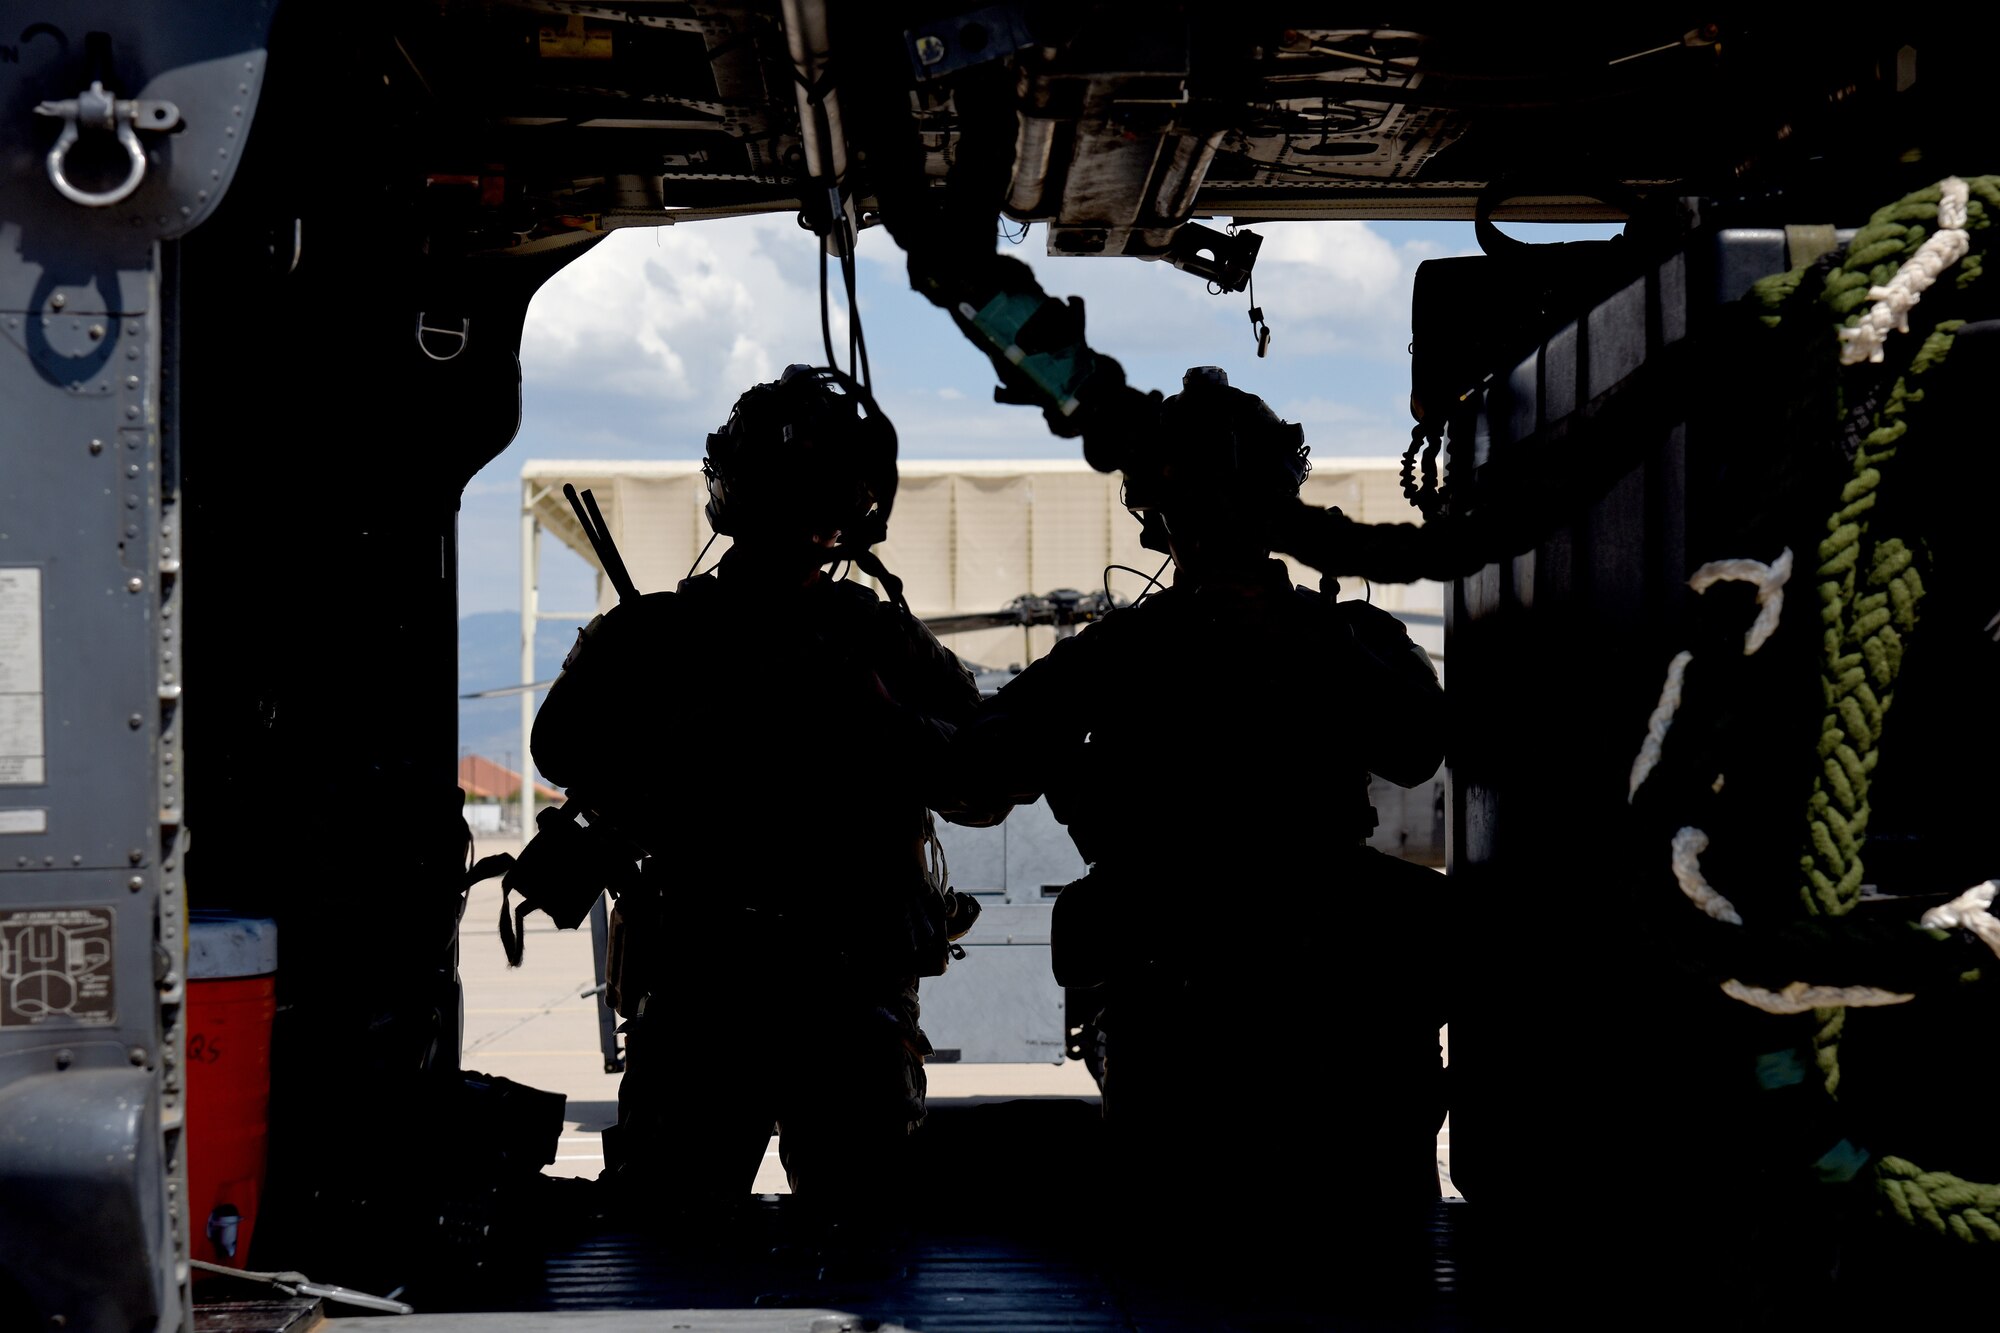 Photo of two Air Force Airmen casting a silhouette behind the side door of an HH-60G Pavehawk on a military flightline